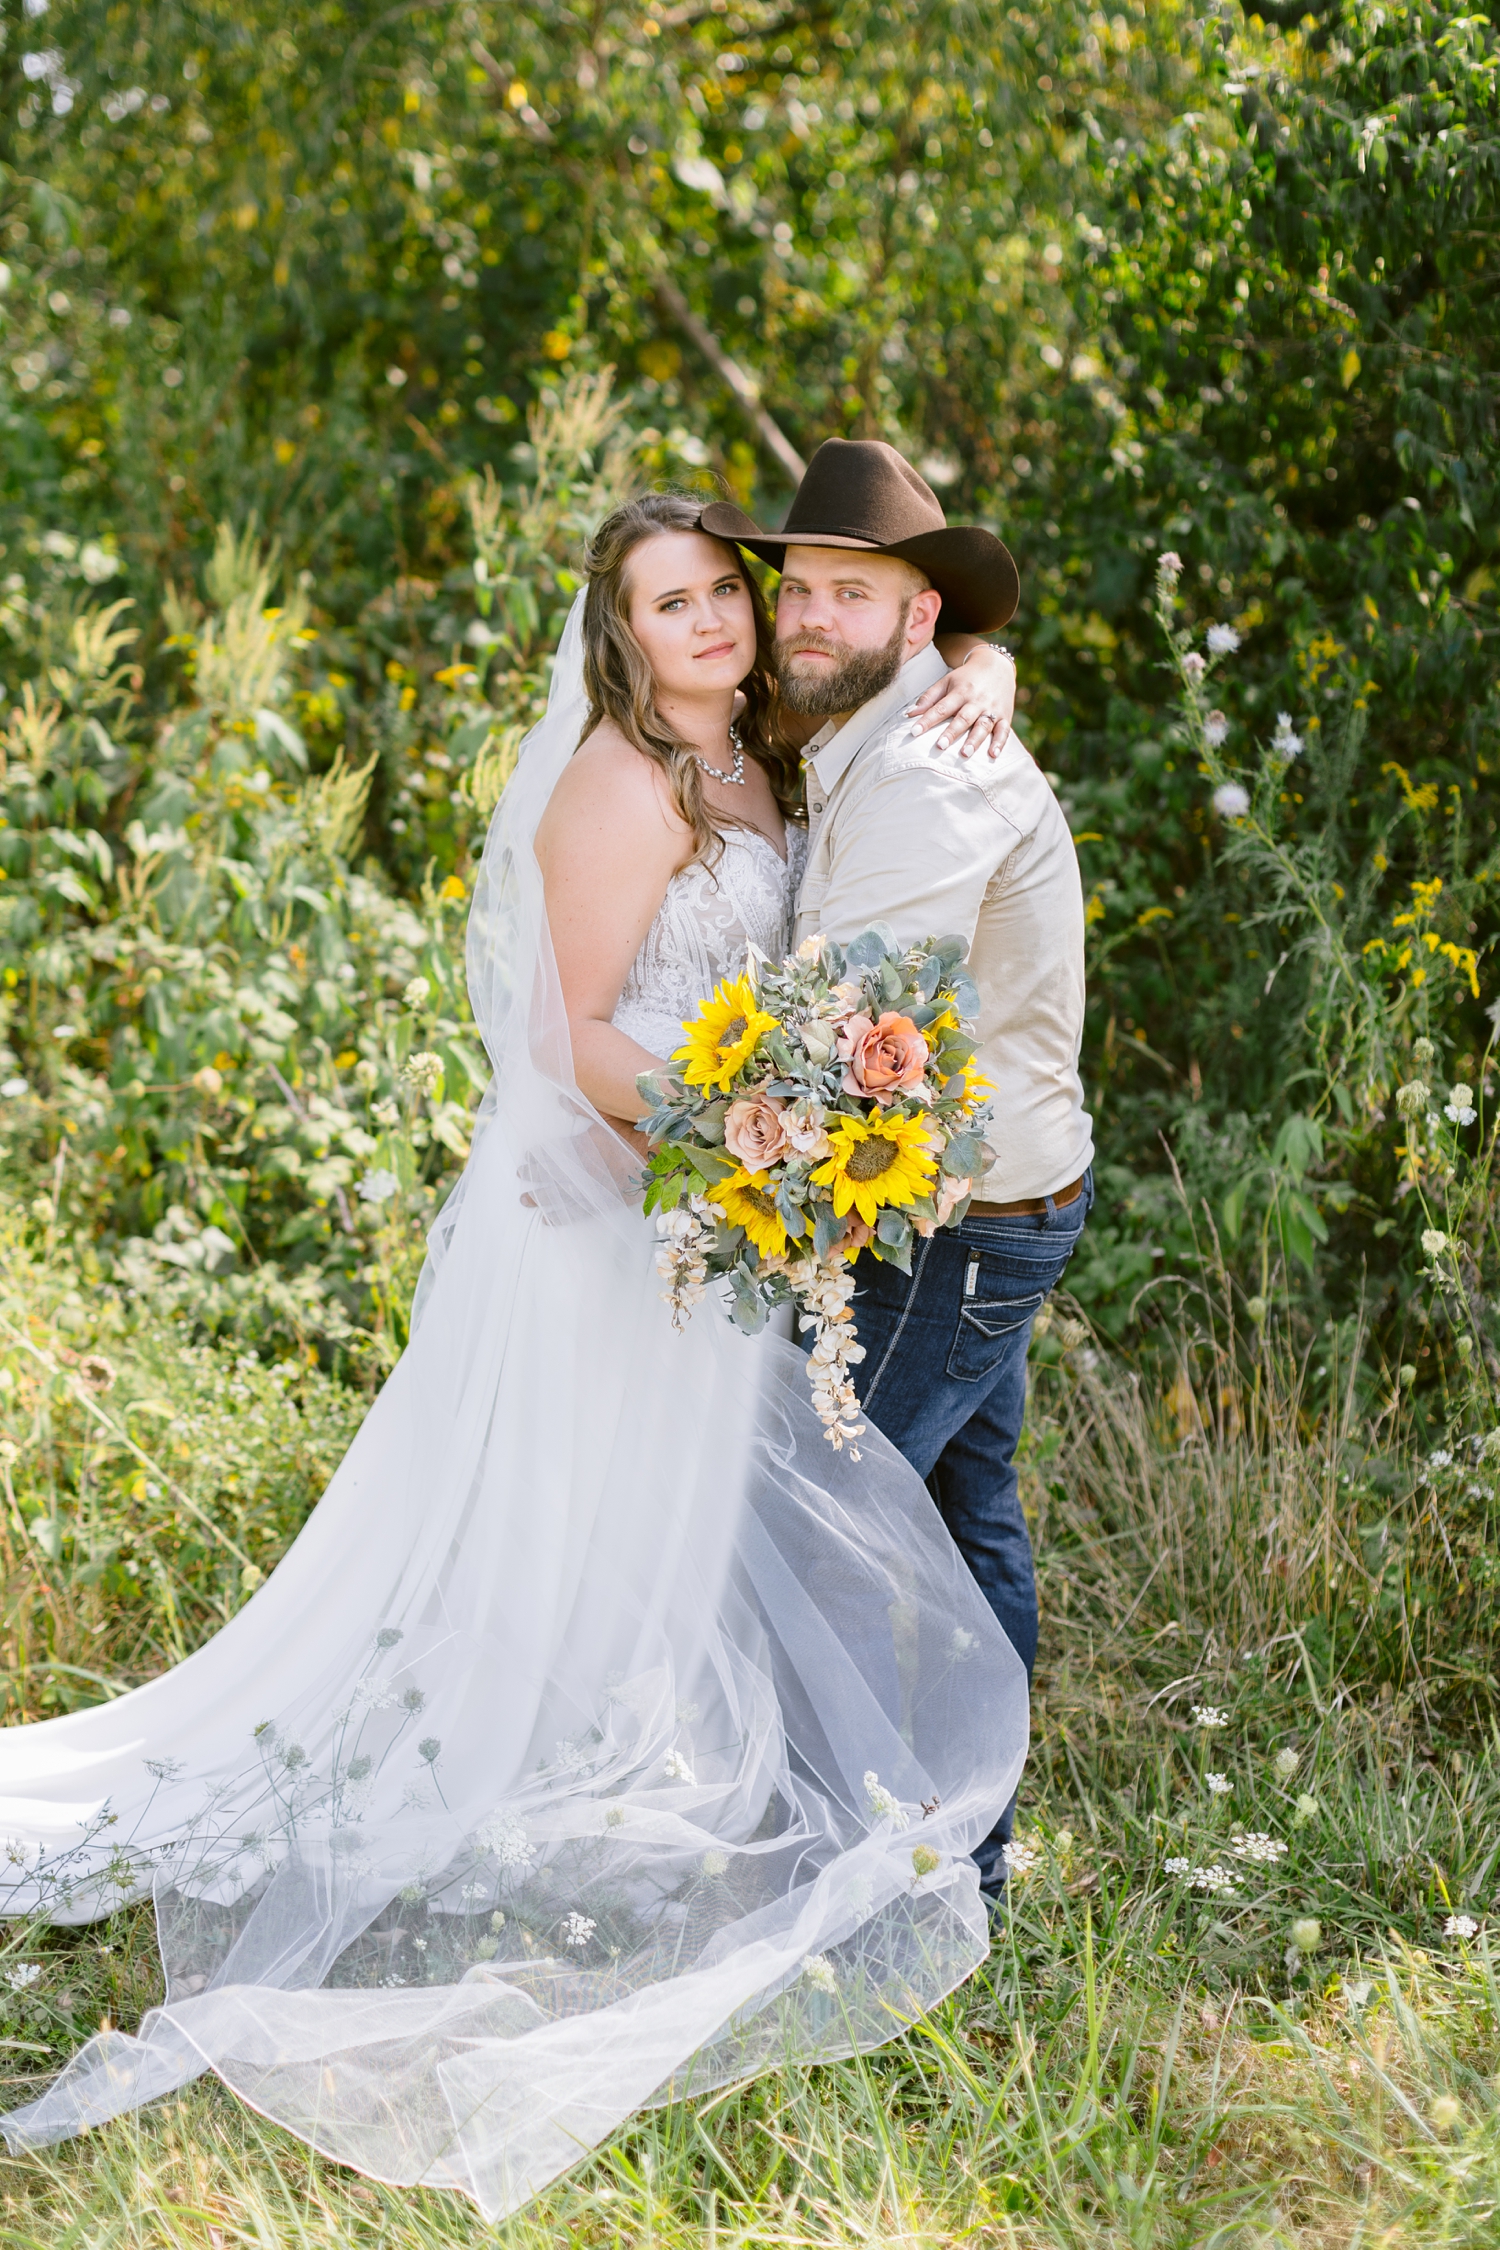 Megan and Matt embrace in a grassy, flower field in Knoxville, IA | A rustic, country wedding with western touches | CB Studio